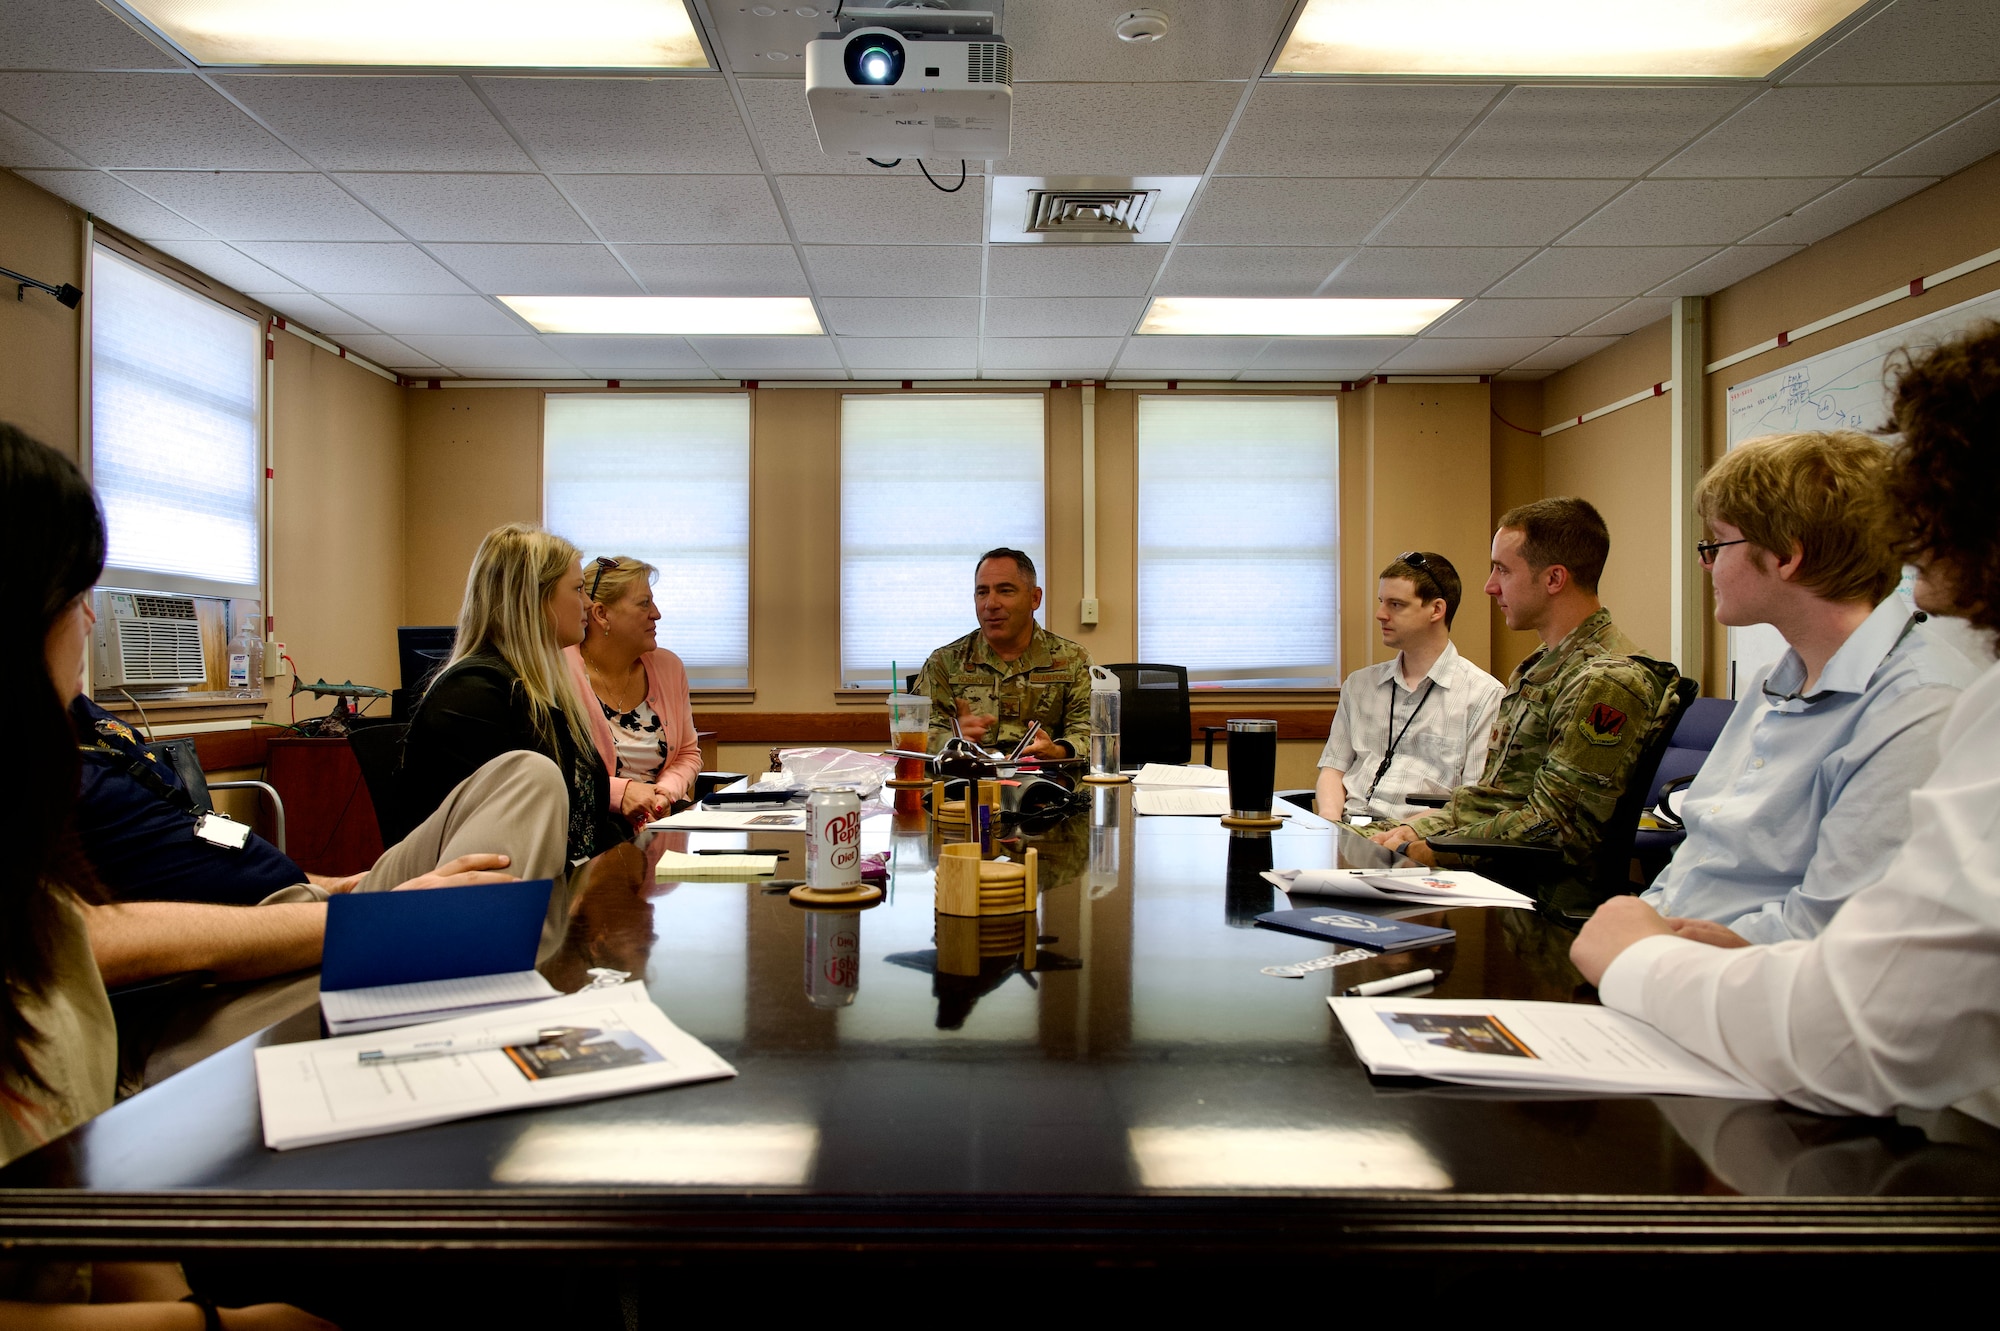 U.S. Air Force Col. Josh Koslov, 350th Spectrum Warfare commander, center, briefs interns that are part of the Virtual Institutes for Cyber and
Electromagnetic Spectrum Research and Employ (VICEROY) Program about the wing mission at Eglin Air Force Base, Fla., June 5, 2023. The VICEROY Program allows for college students to work at DoD organizations to get hands on training and experience with critical missions to prepare them for a potential future career with the government. (U.S. Air Force photo by 1st Lt. Benjamin Aronson)